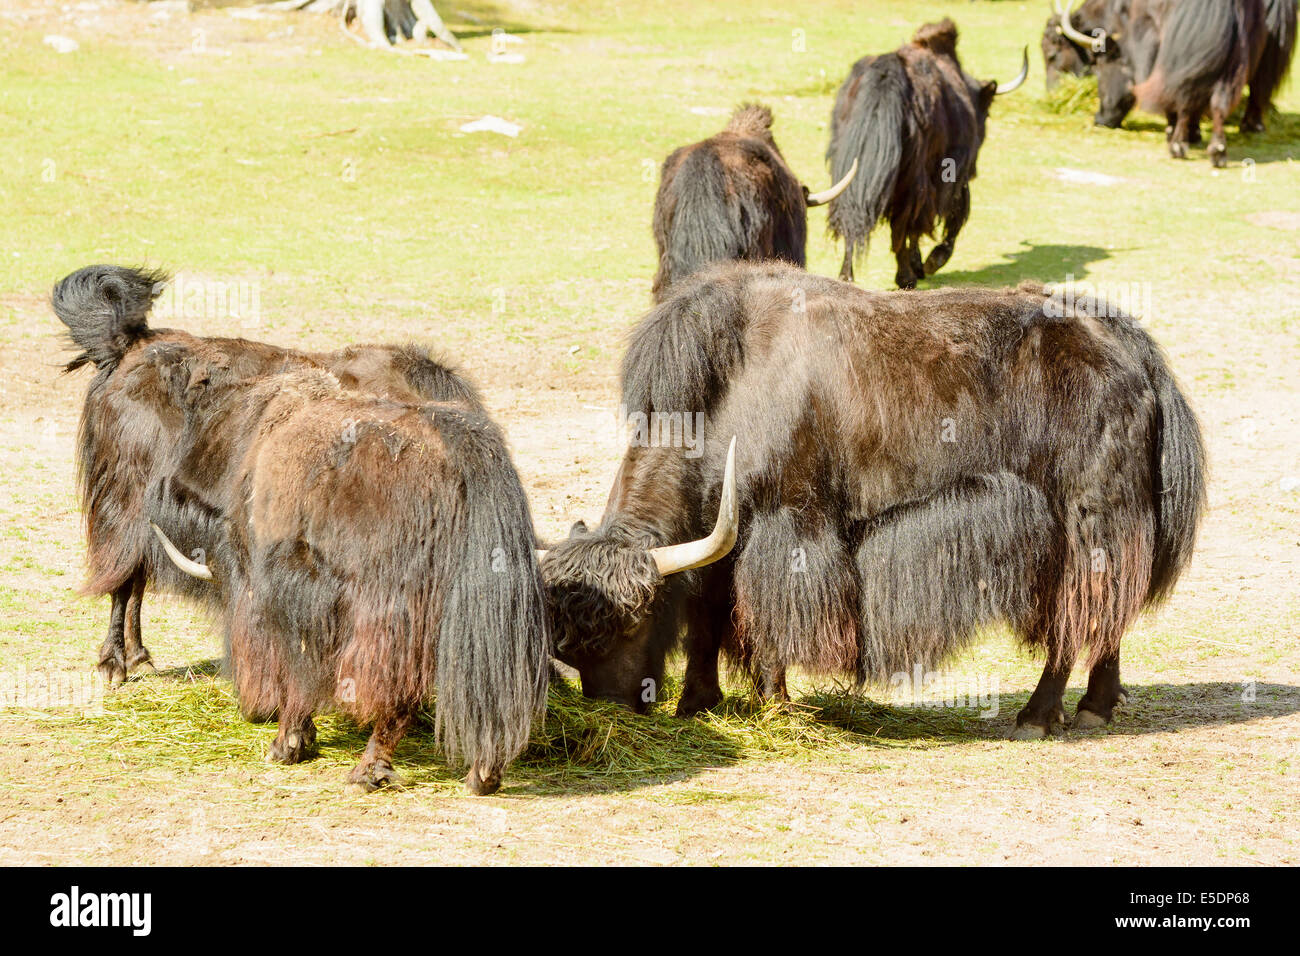 Yak, Bos grunniens, here seen feeding on pile of grass. Stock Photo